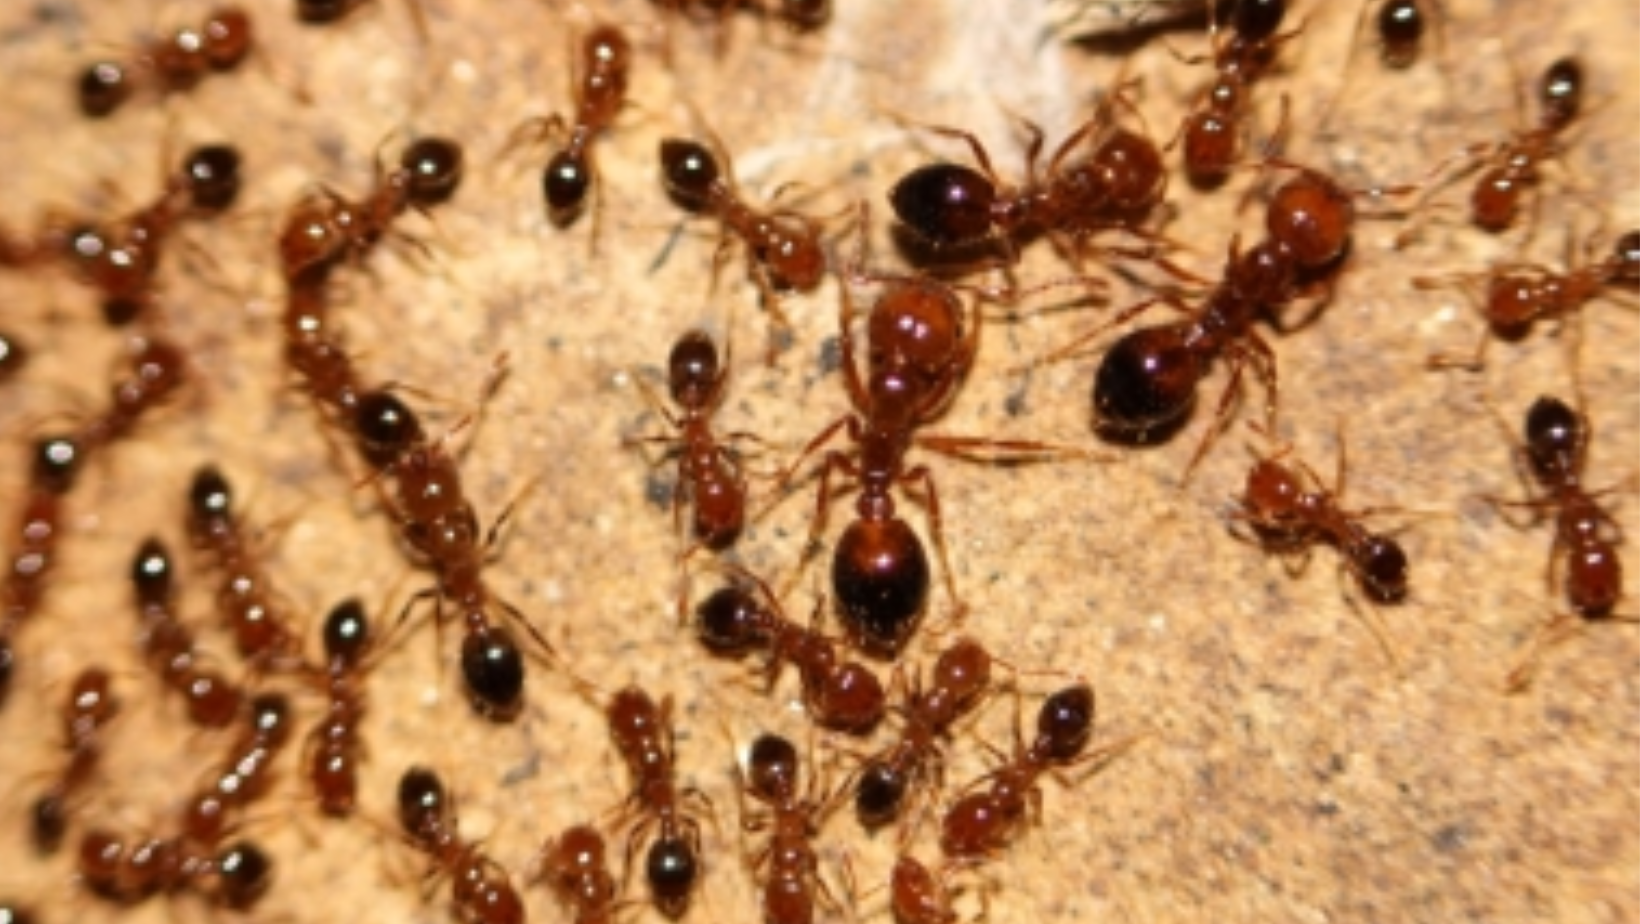 Ant Prevention Tips: How To Keep Ants From Entering Your Home